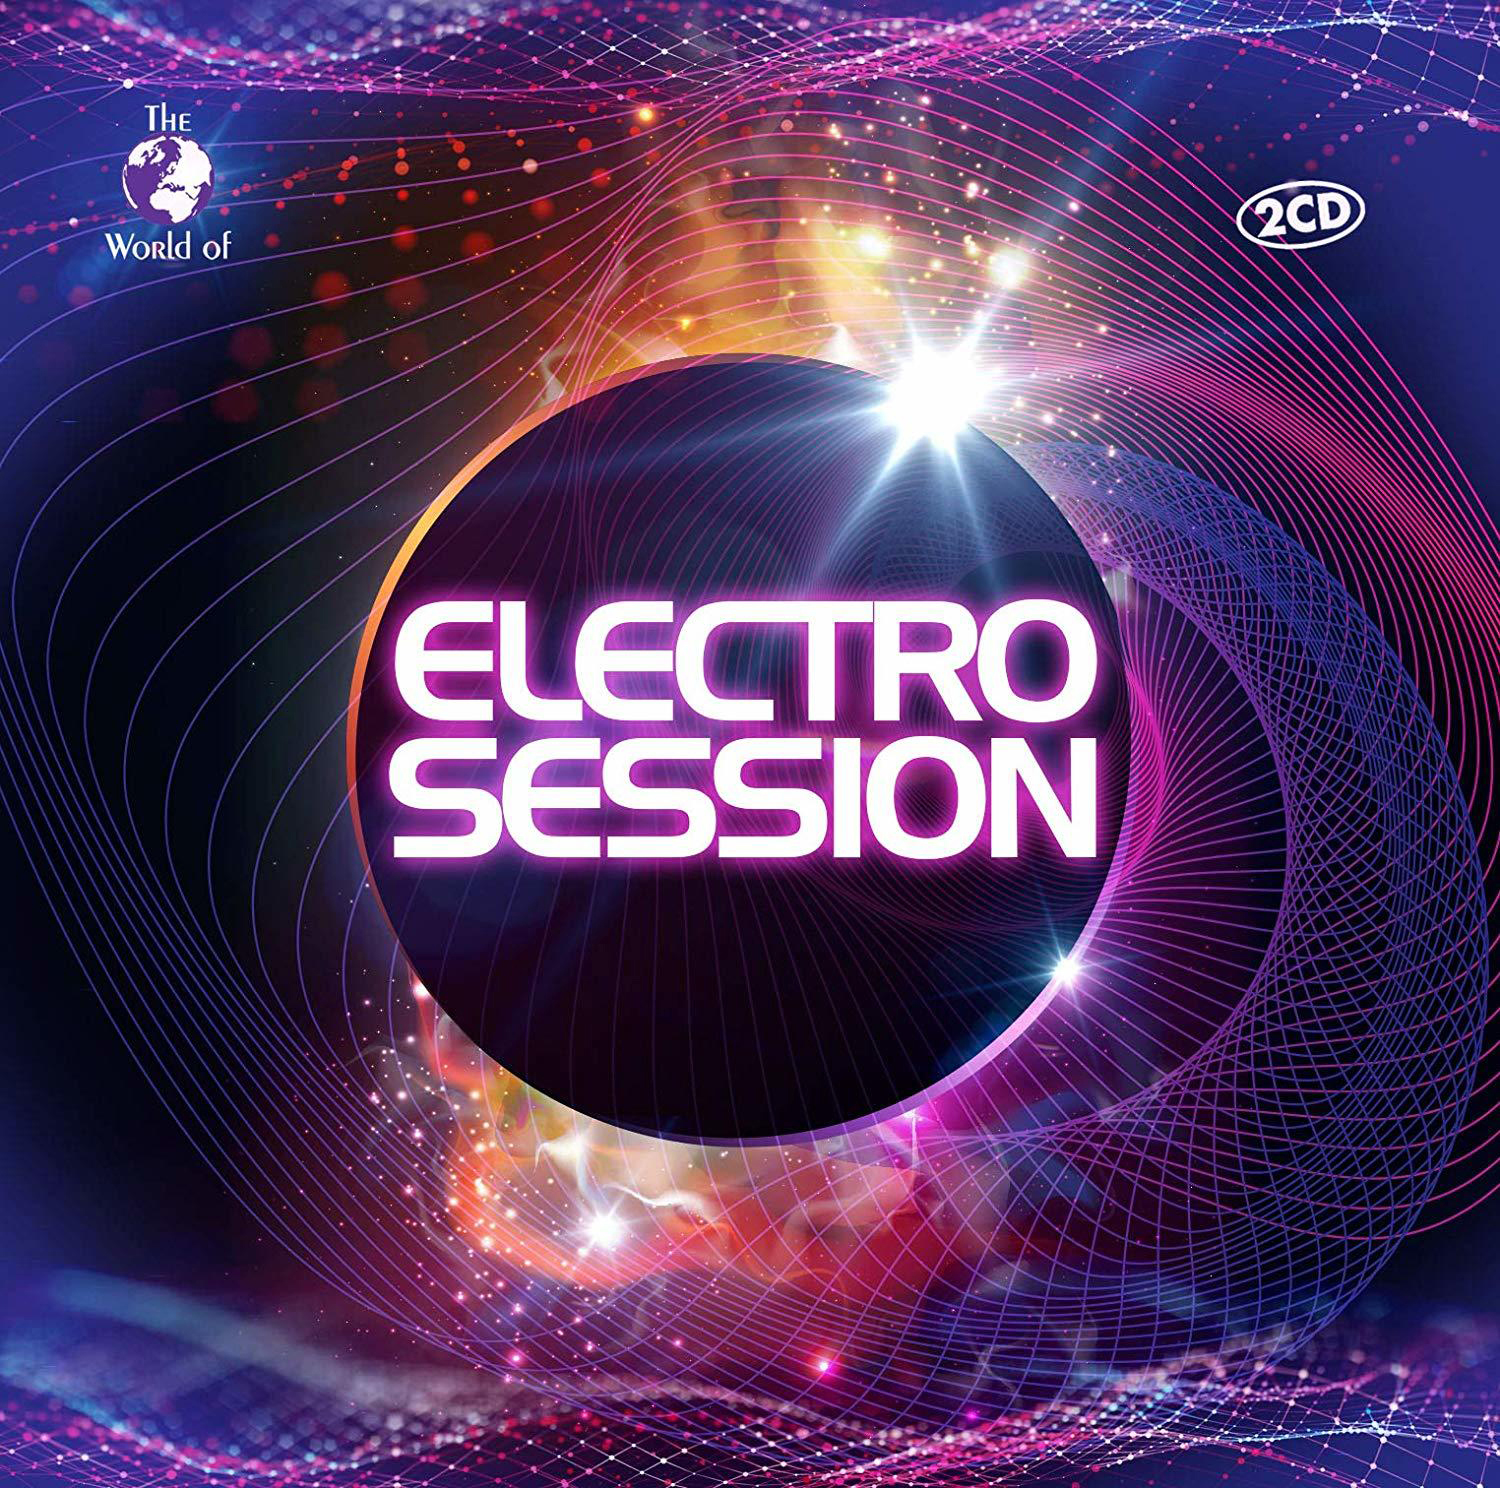 VARIOUS - Electro Session (CD) 